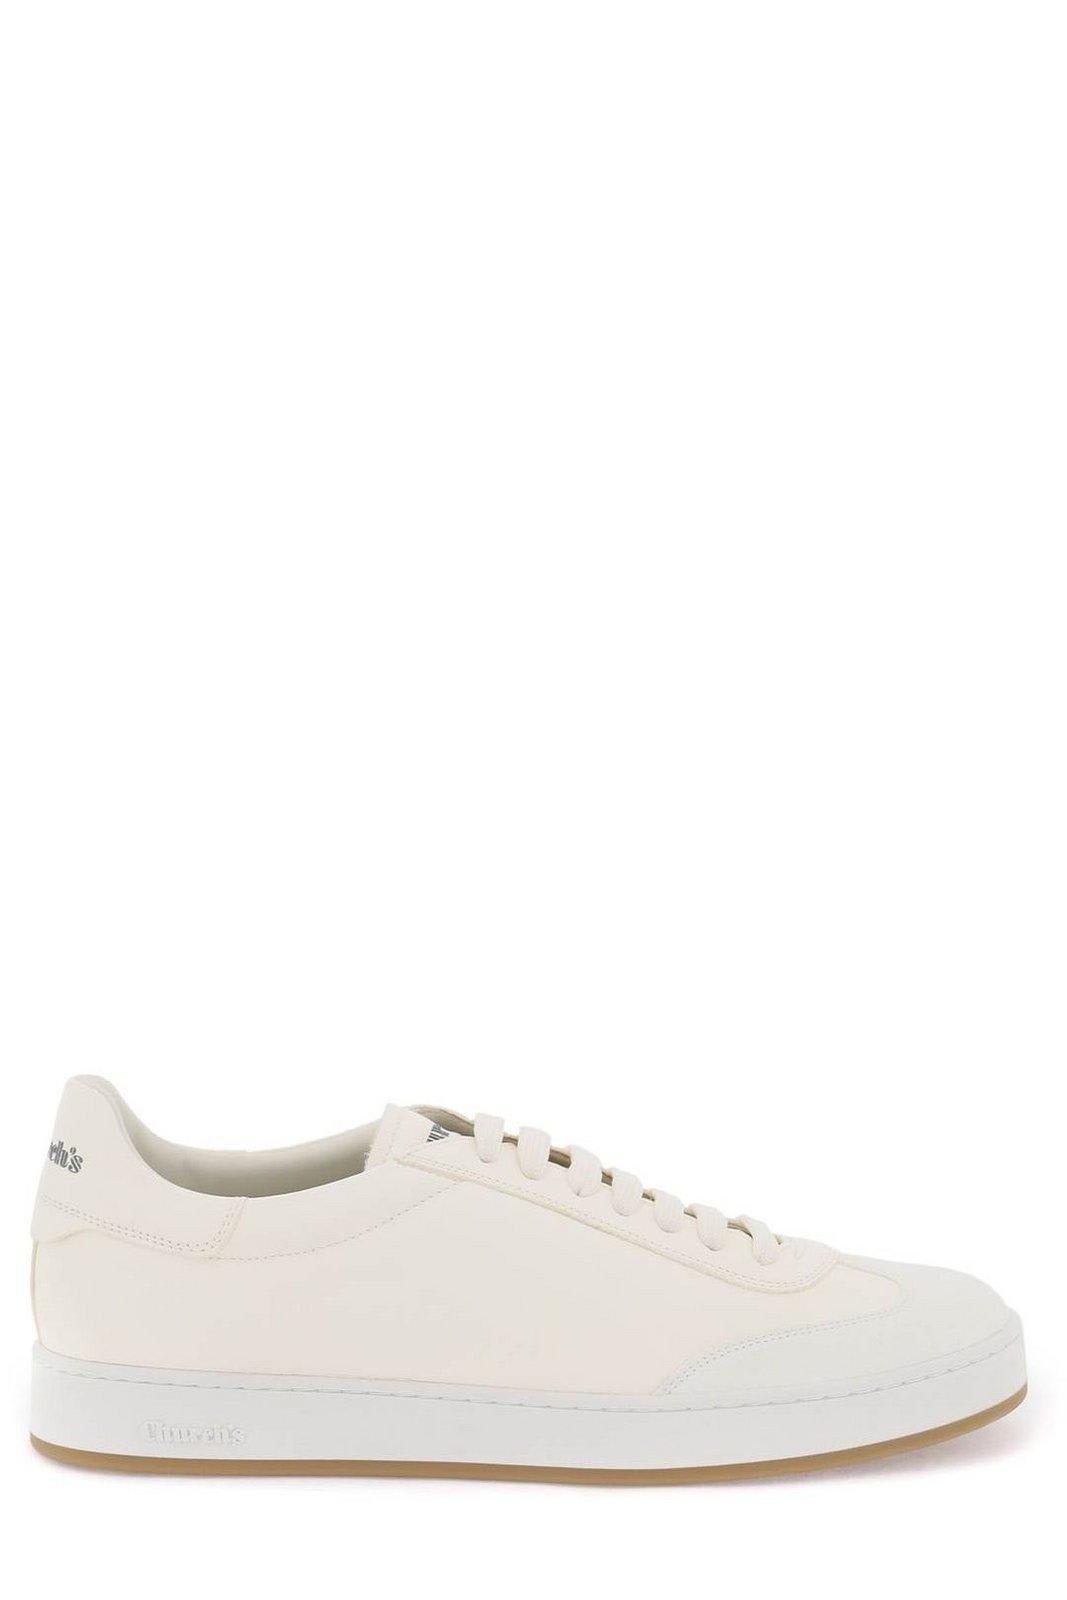 CHURCH'S LARGS LOW-TOP SNEAKERS